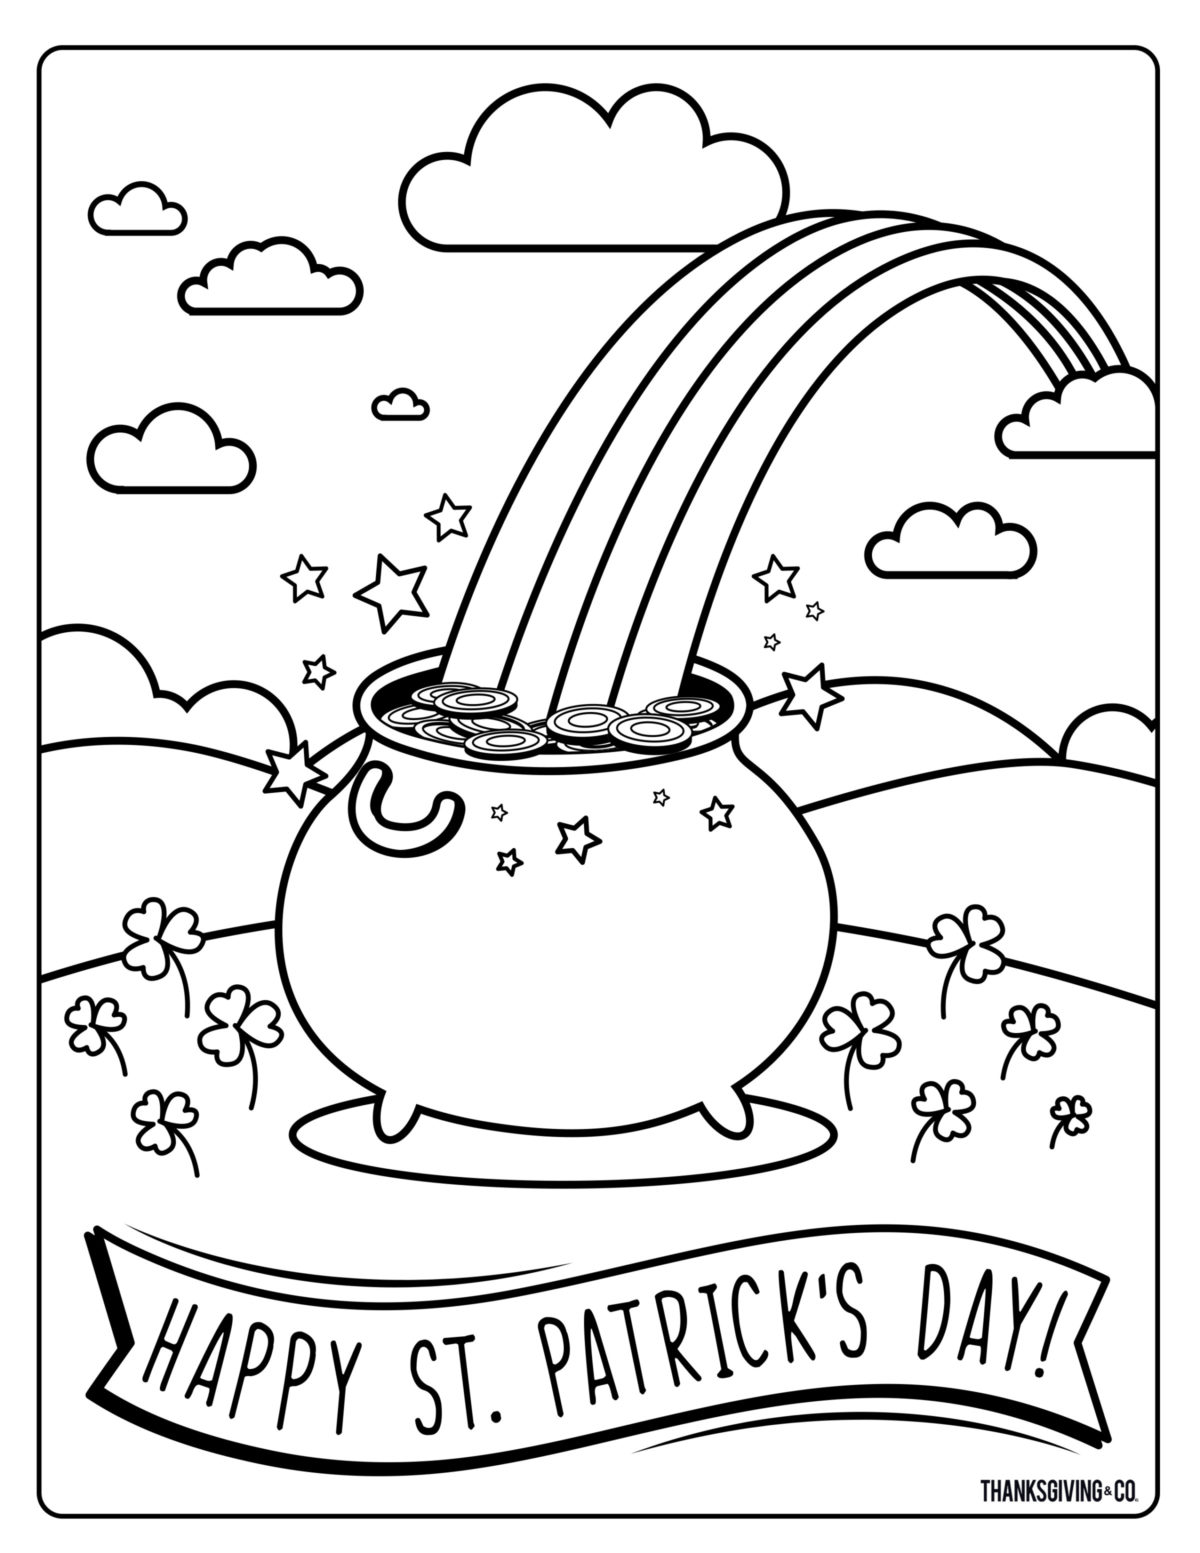 6 Printable Whimsical St Patrick S Day Coloring Pages For Kids